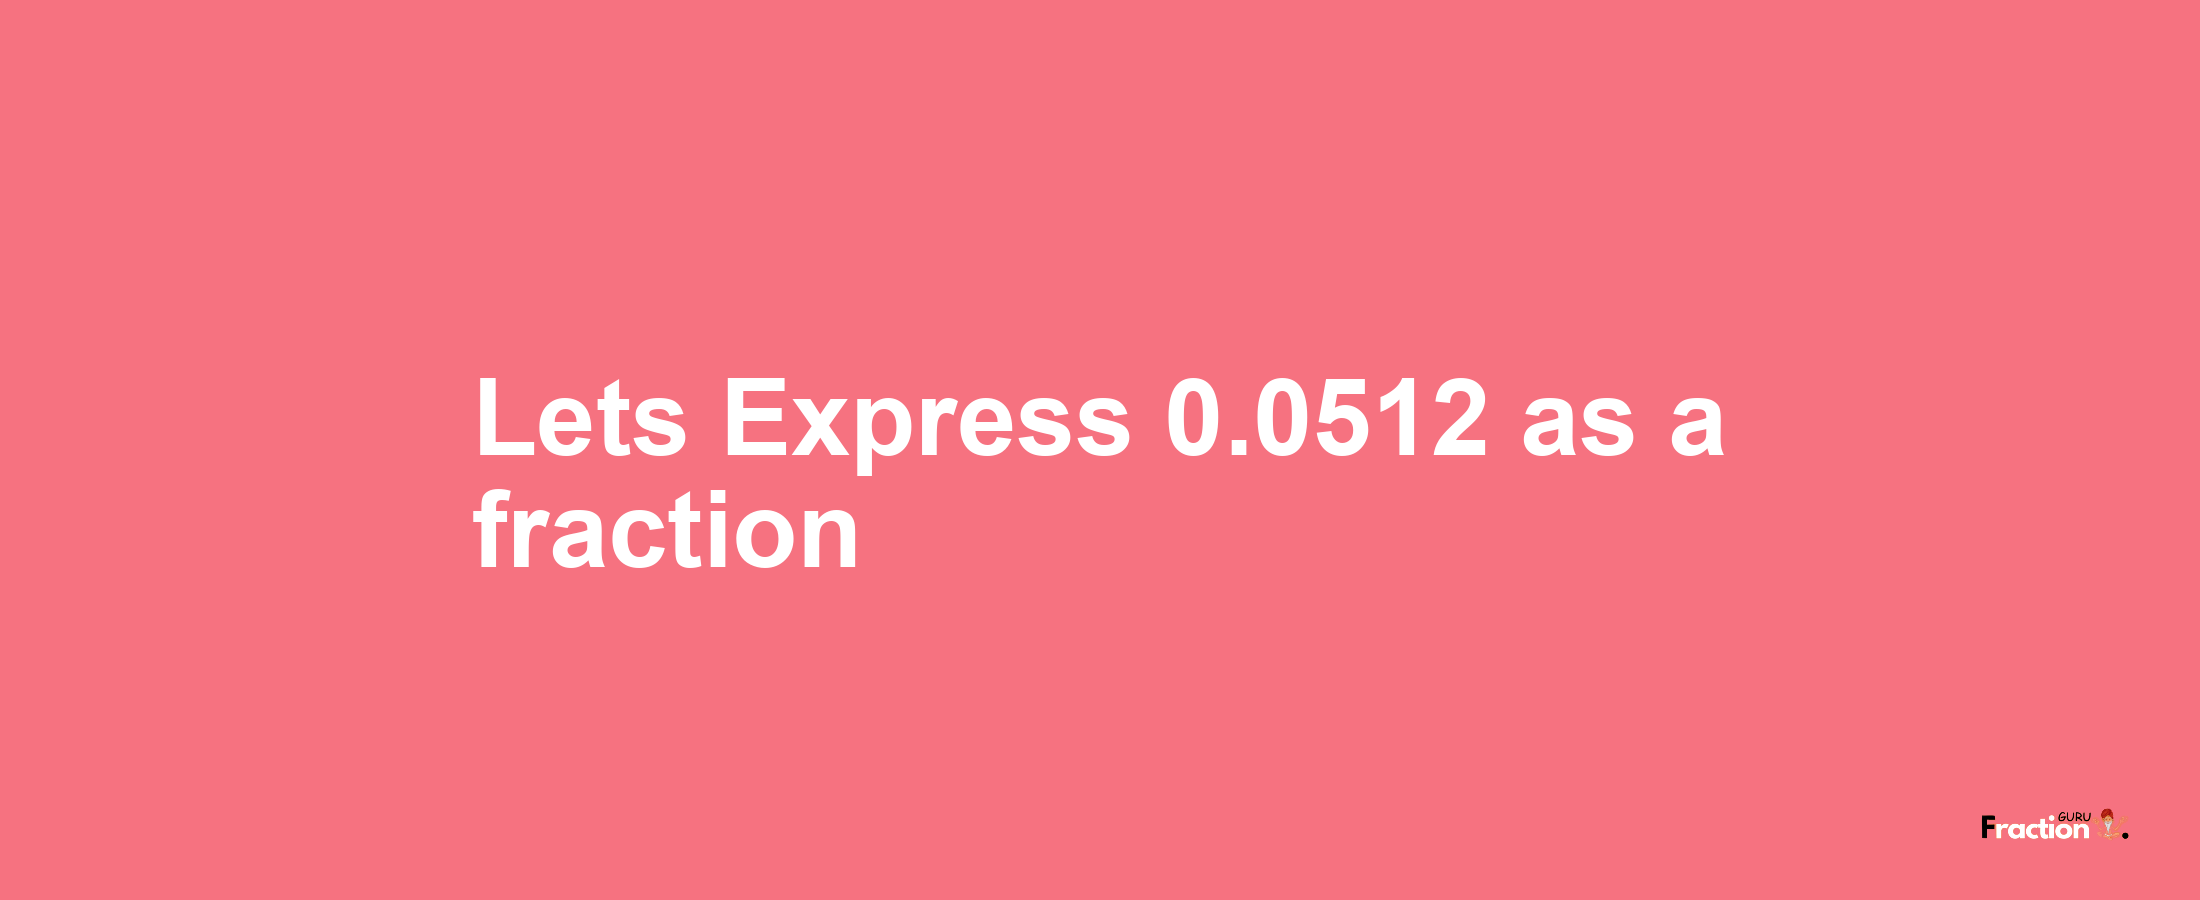 Lets Express 0.0512 as afraction